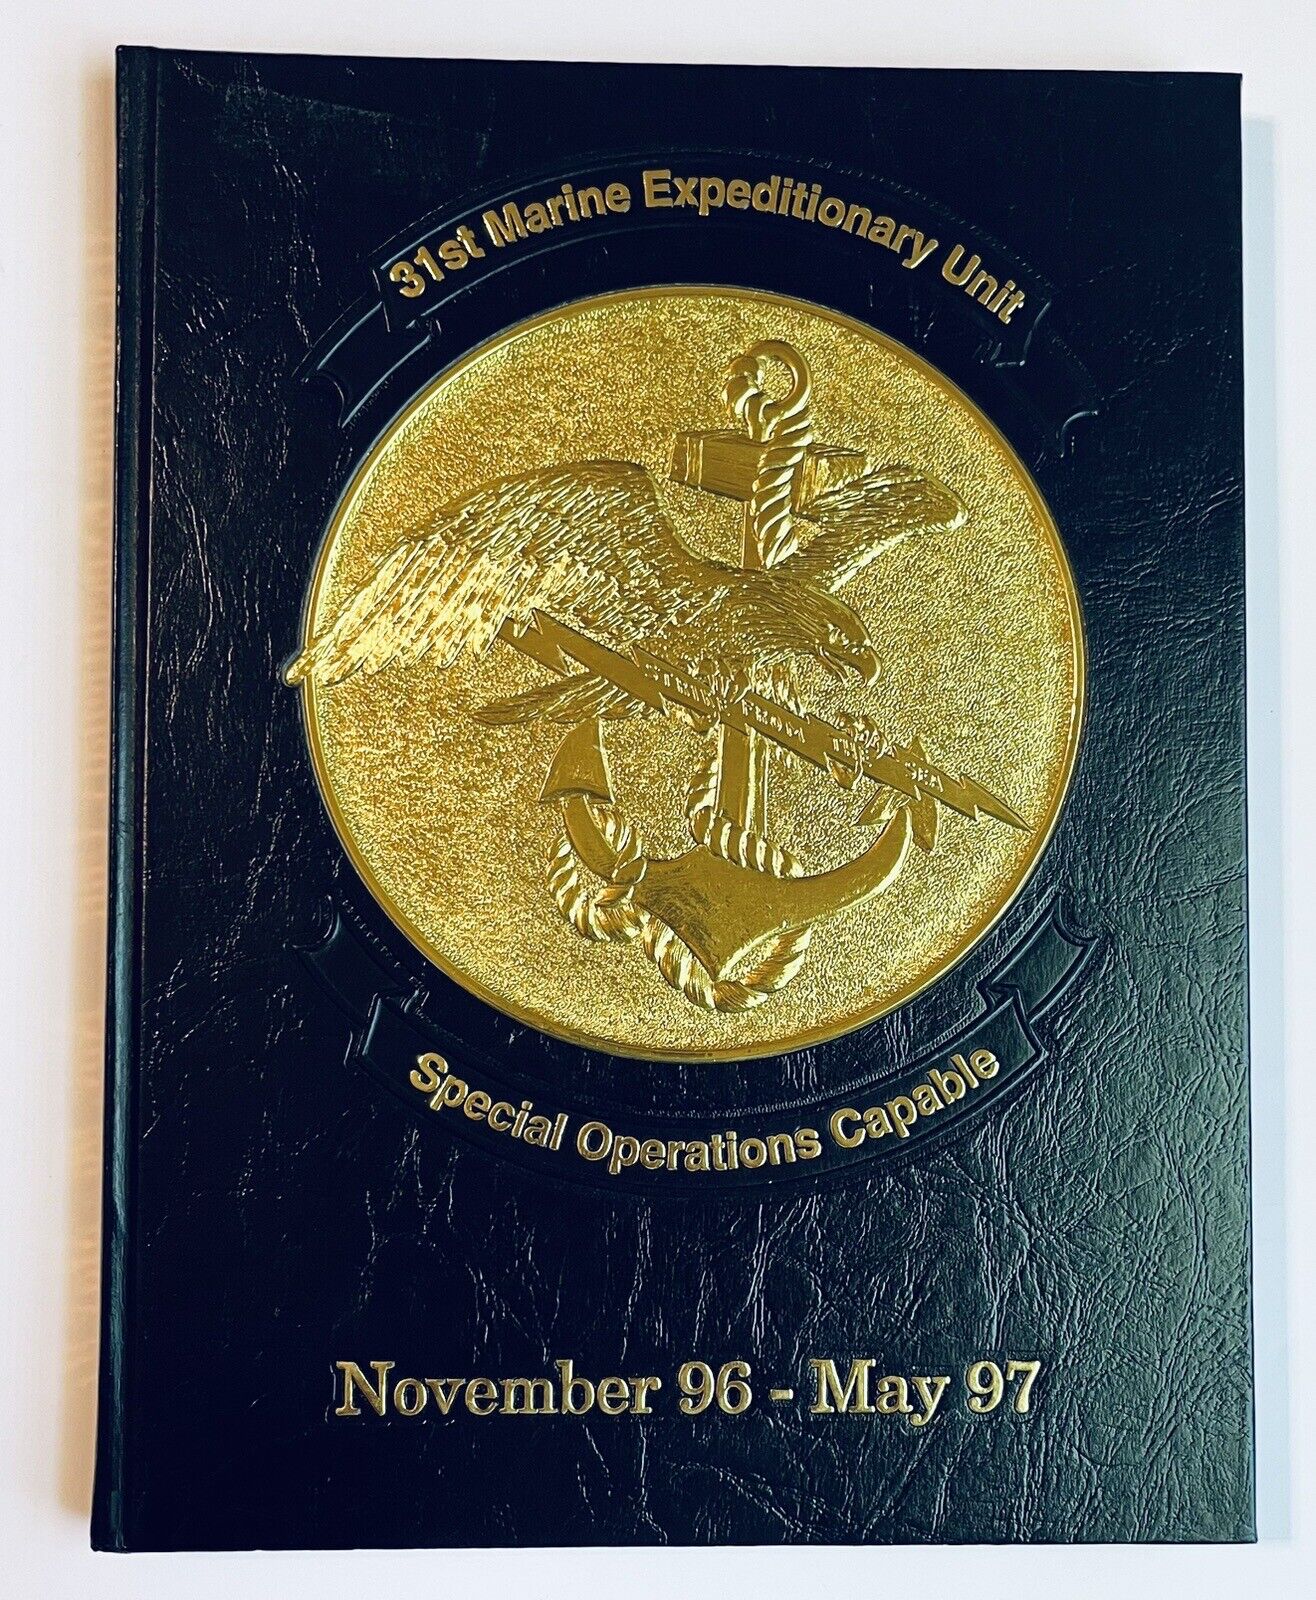 31st Marine Expeditionary Unit - Special Operations Capable- Nov 96 - May 97